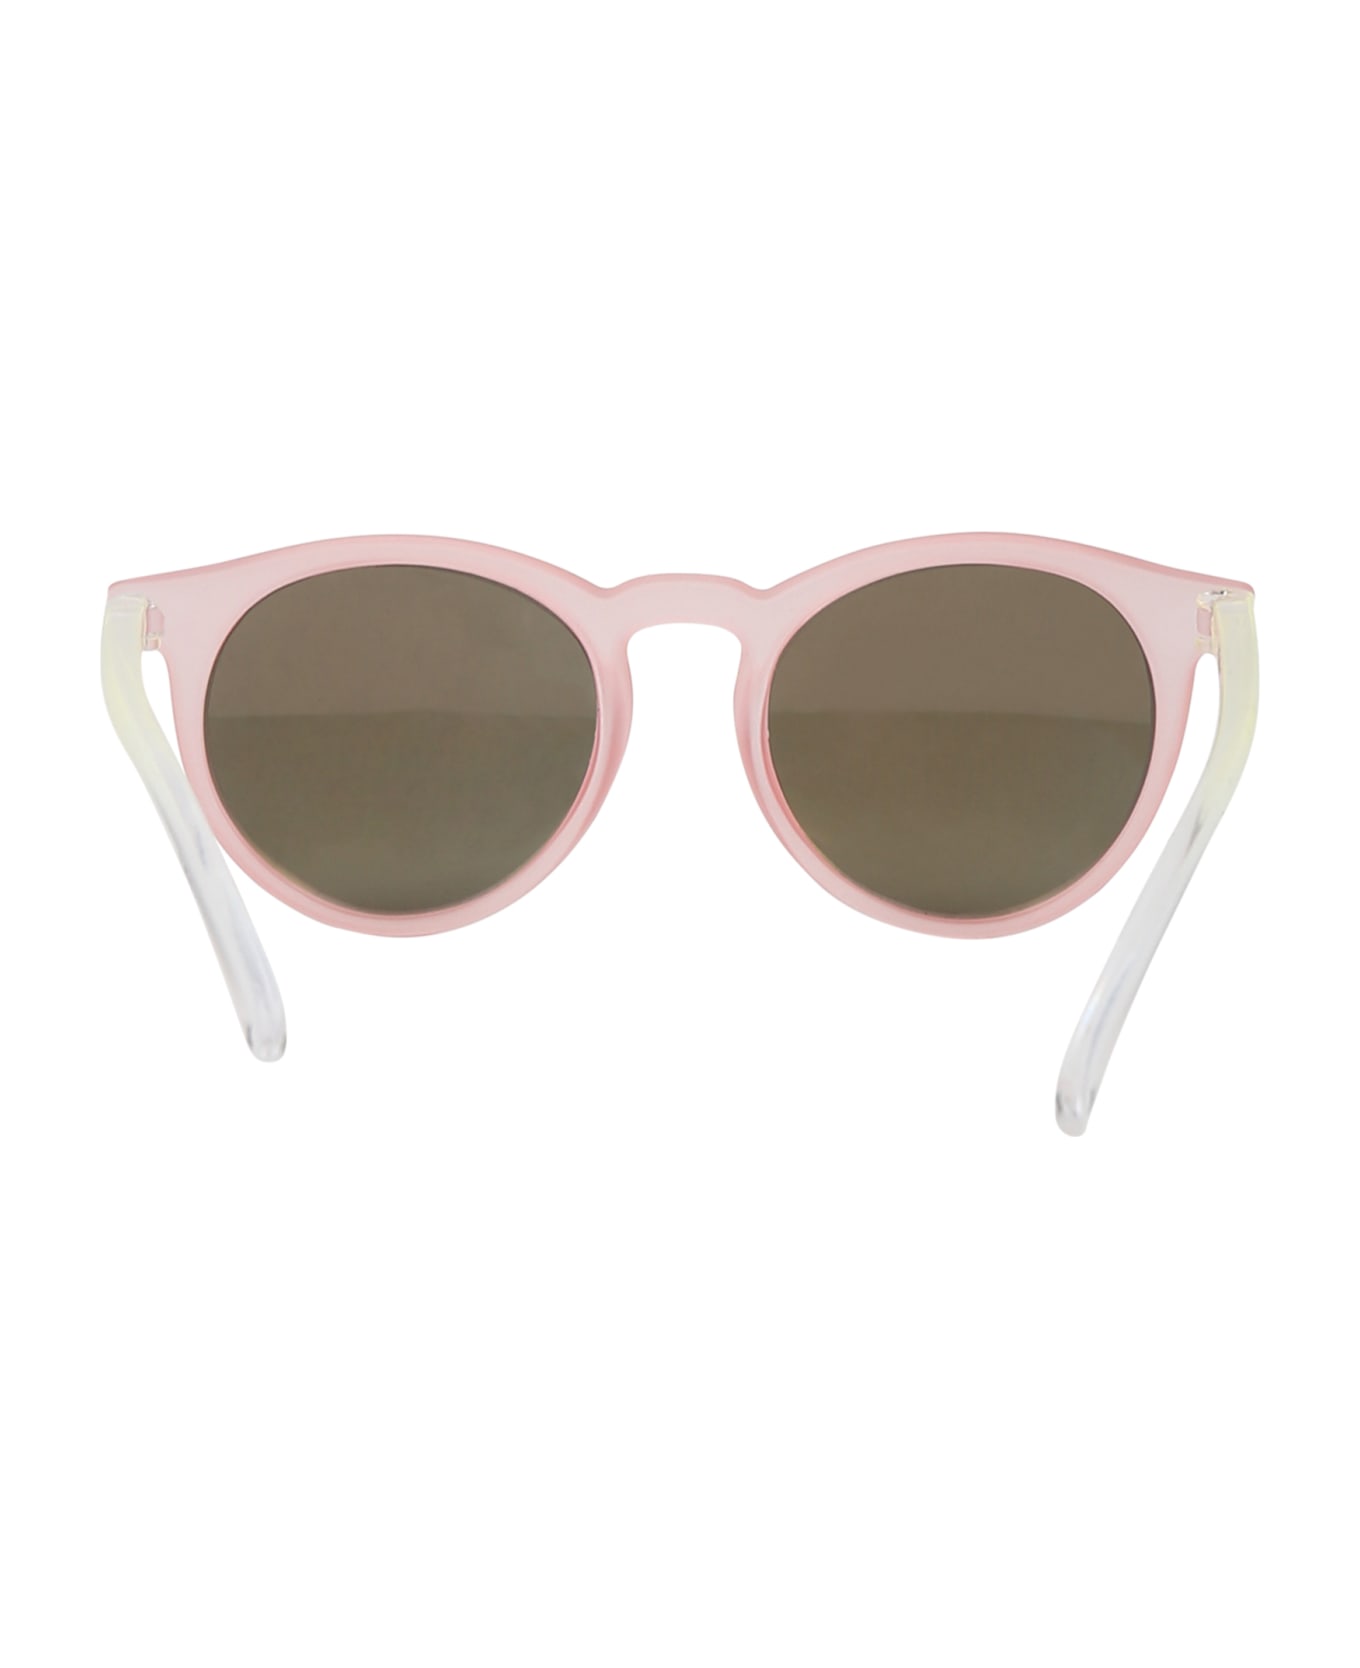 Molo Pink Sunshine Sunglasses For Girl - Pink アクセサリー＆ギフト